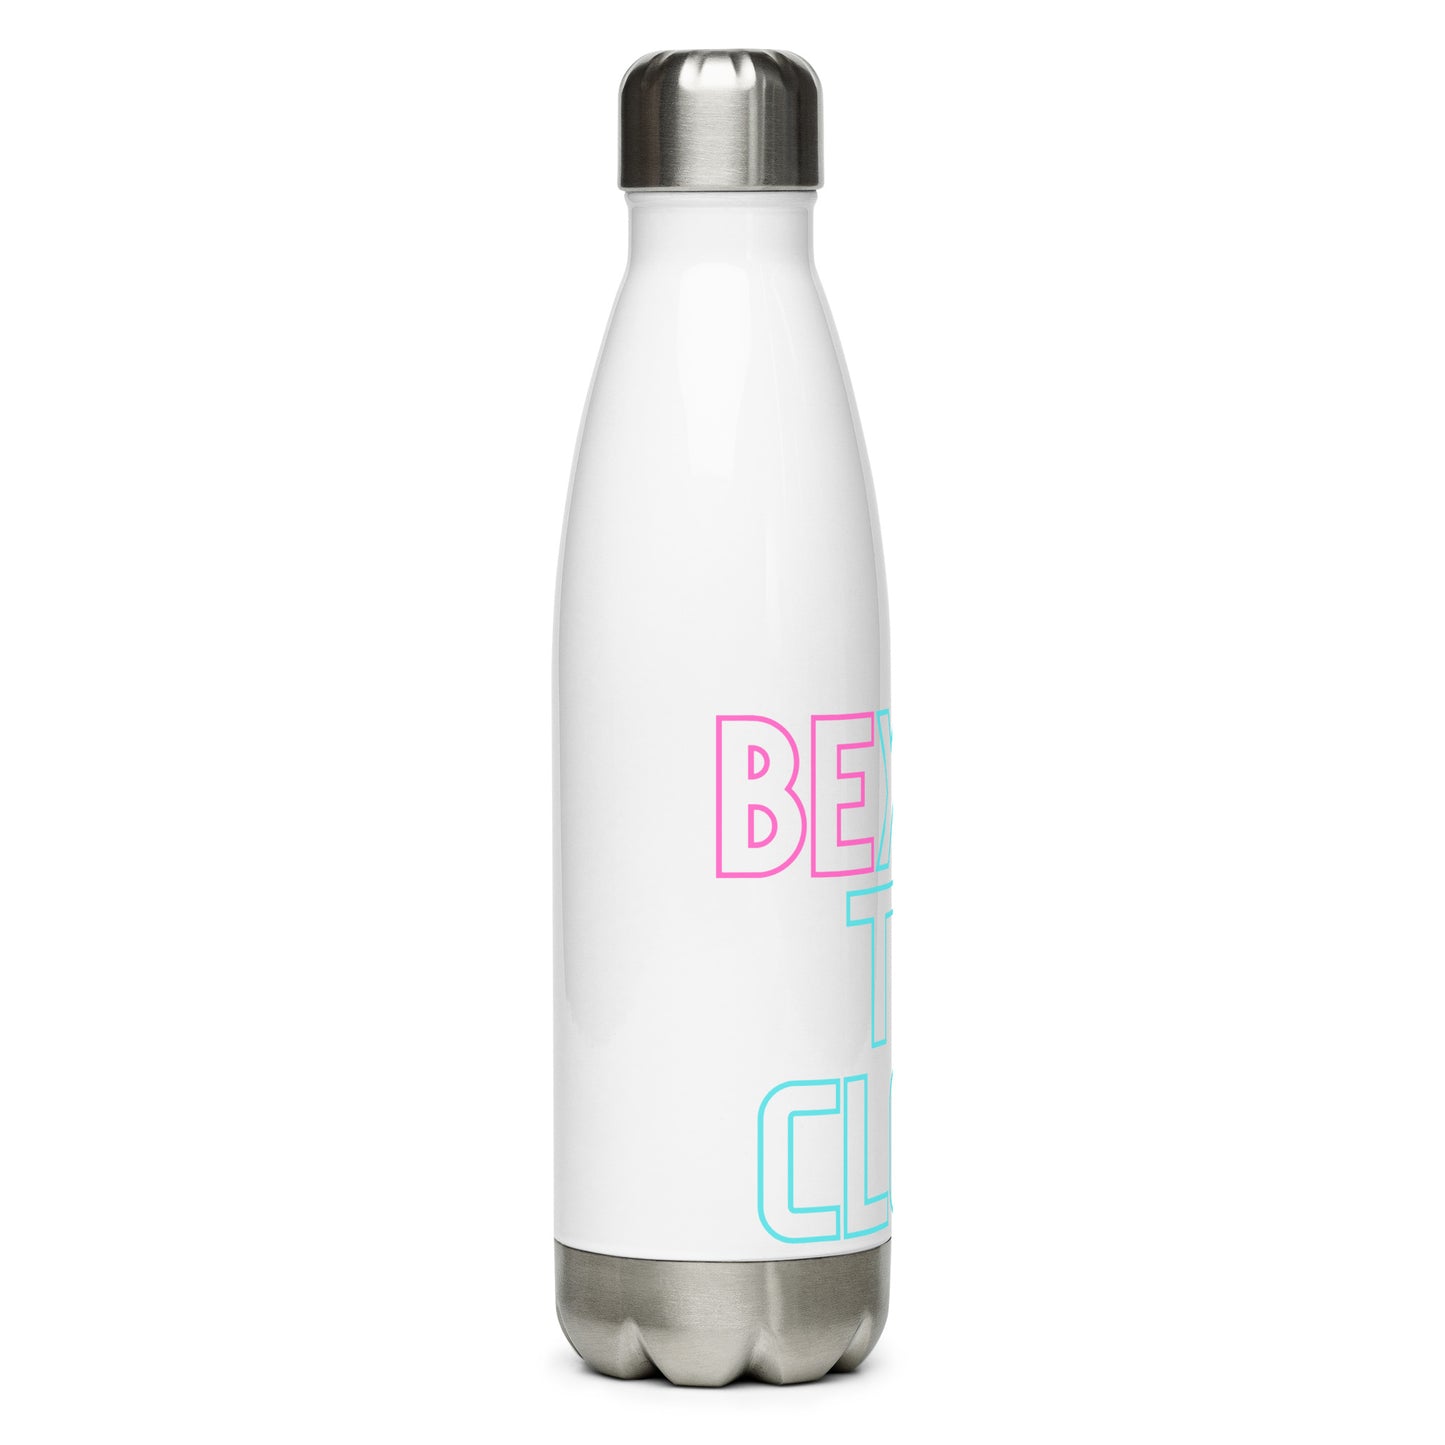 BEyond Stainless Steel Water Bottle